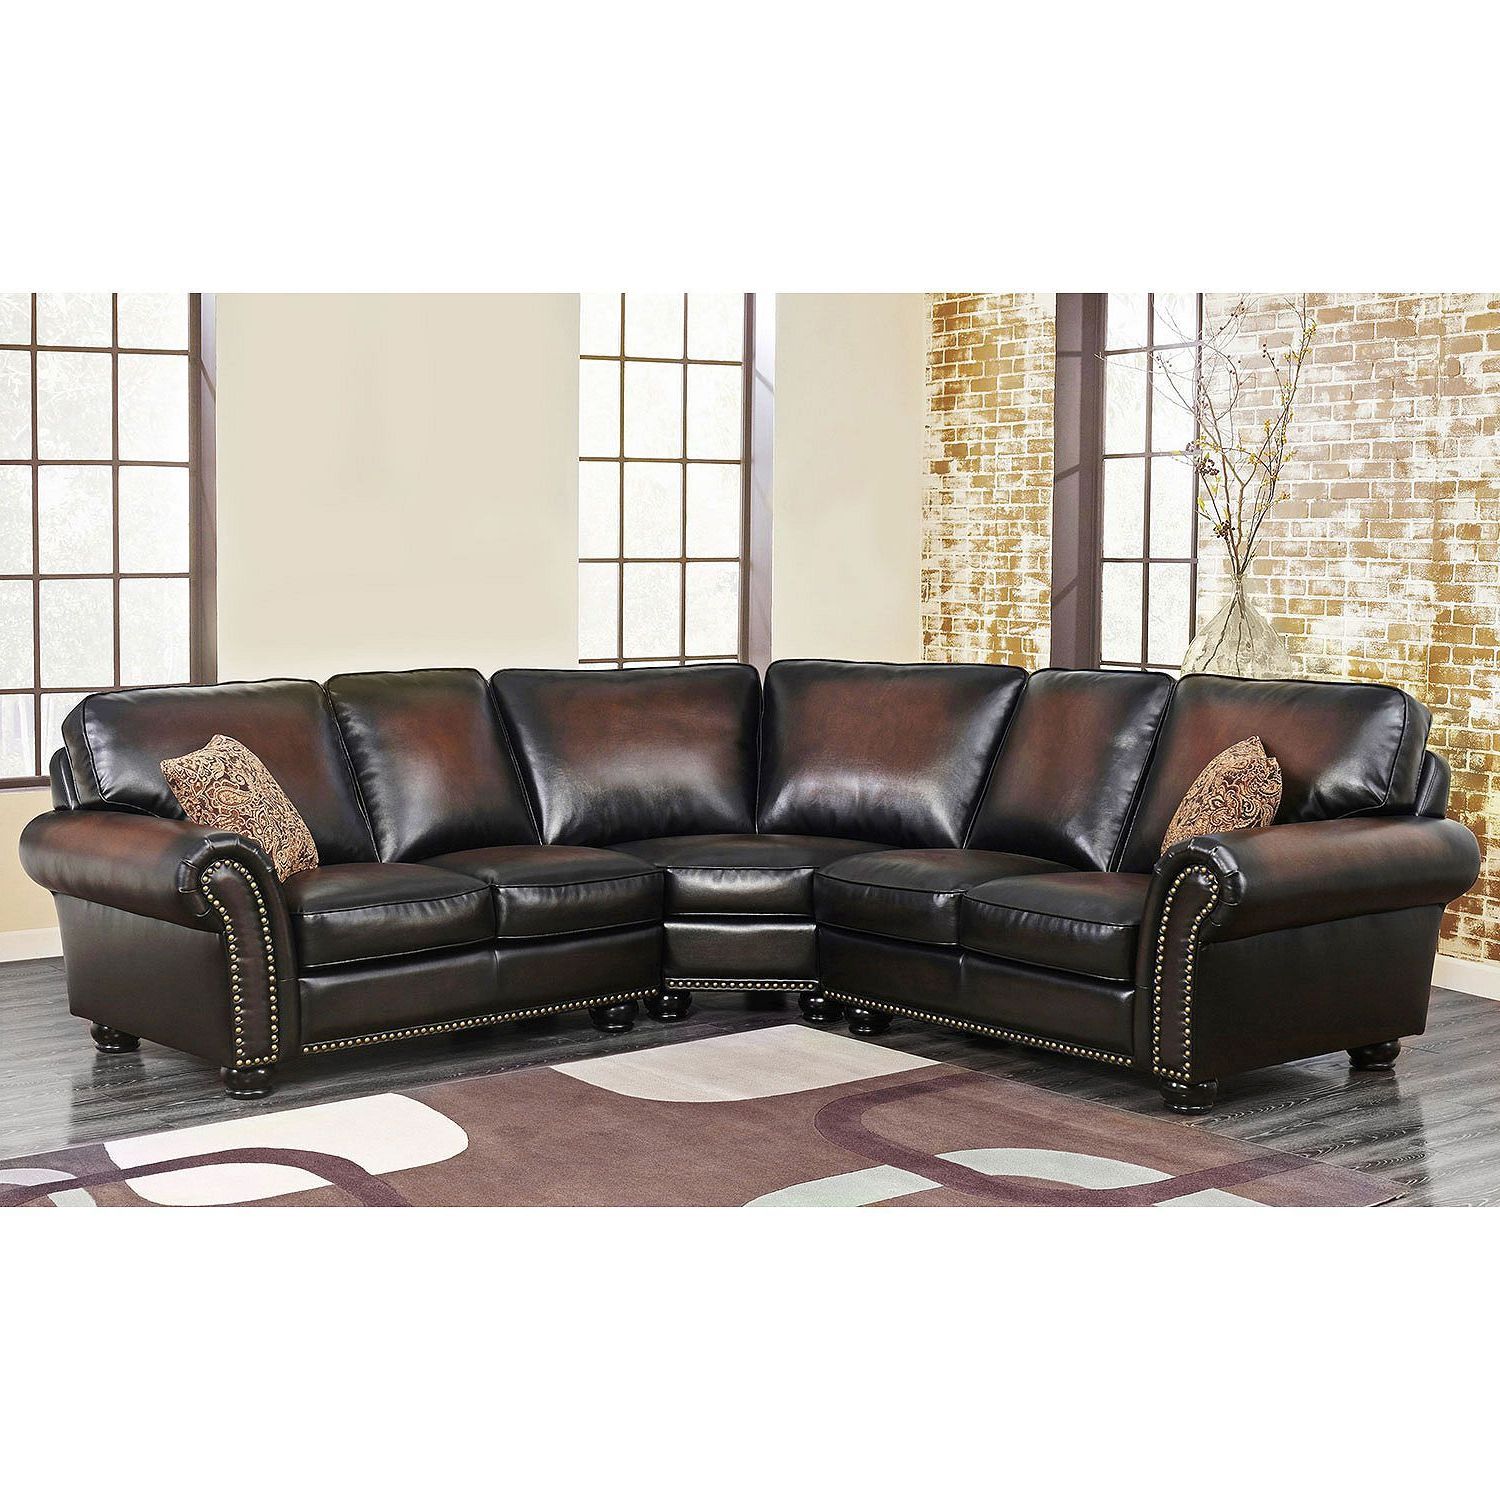 Melrose Leather 3 Piece Sectional – Sam's Club Regarding 3 Piece Leather Sectional Sofa Sets (View 9 of 20)